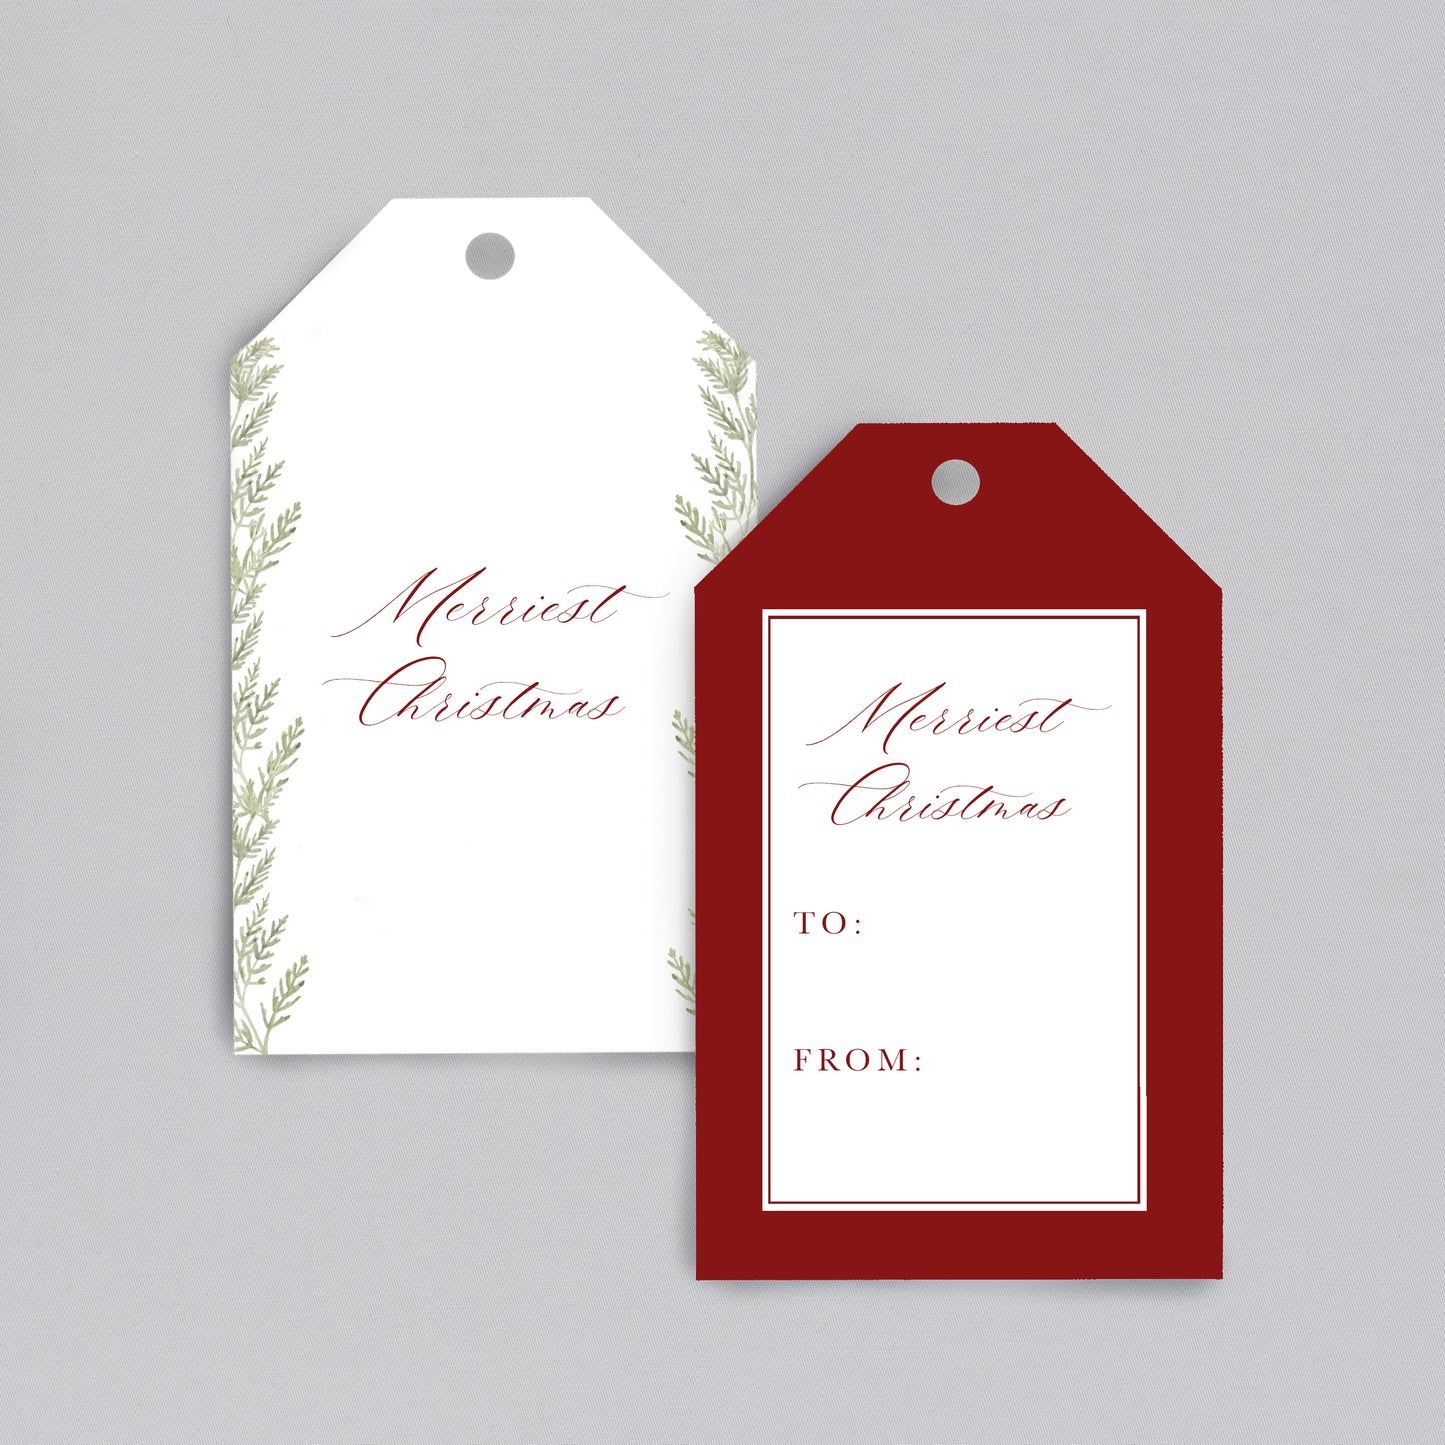 "Merriest Christmas" gift tags